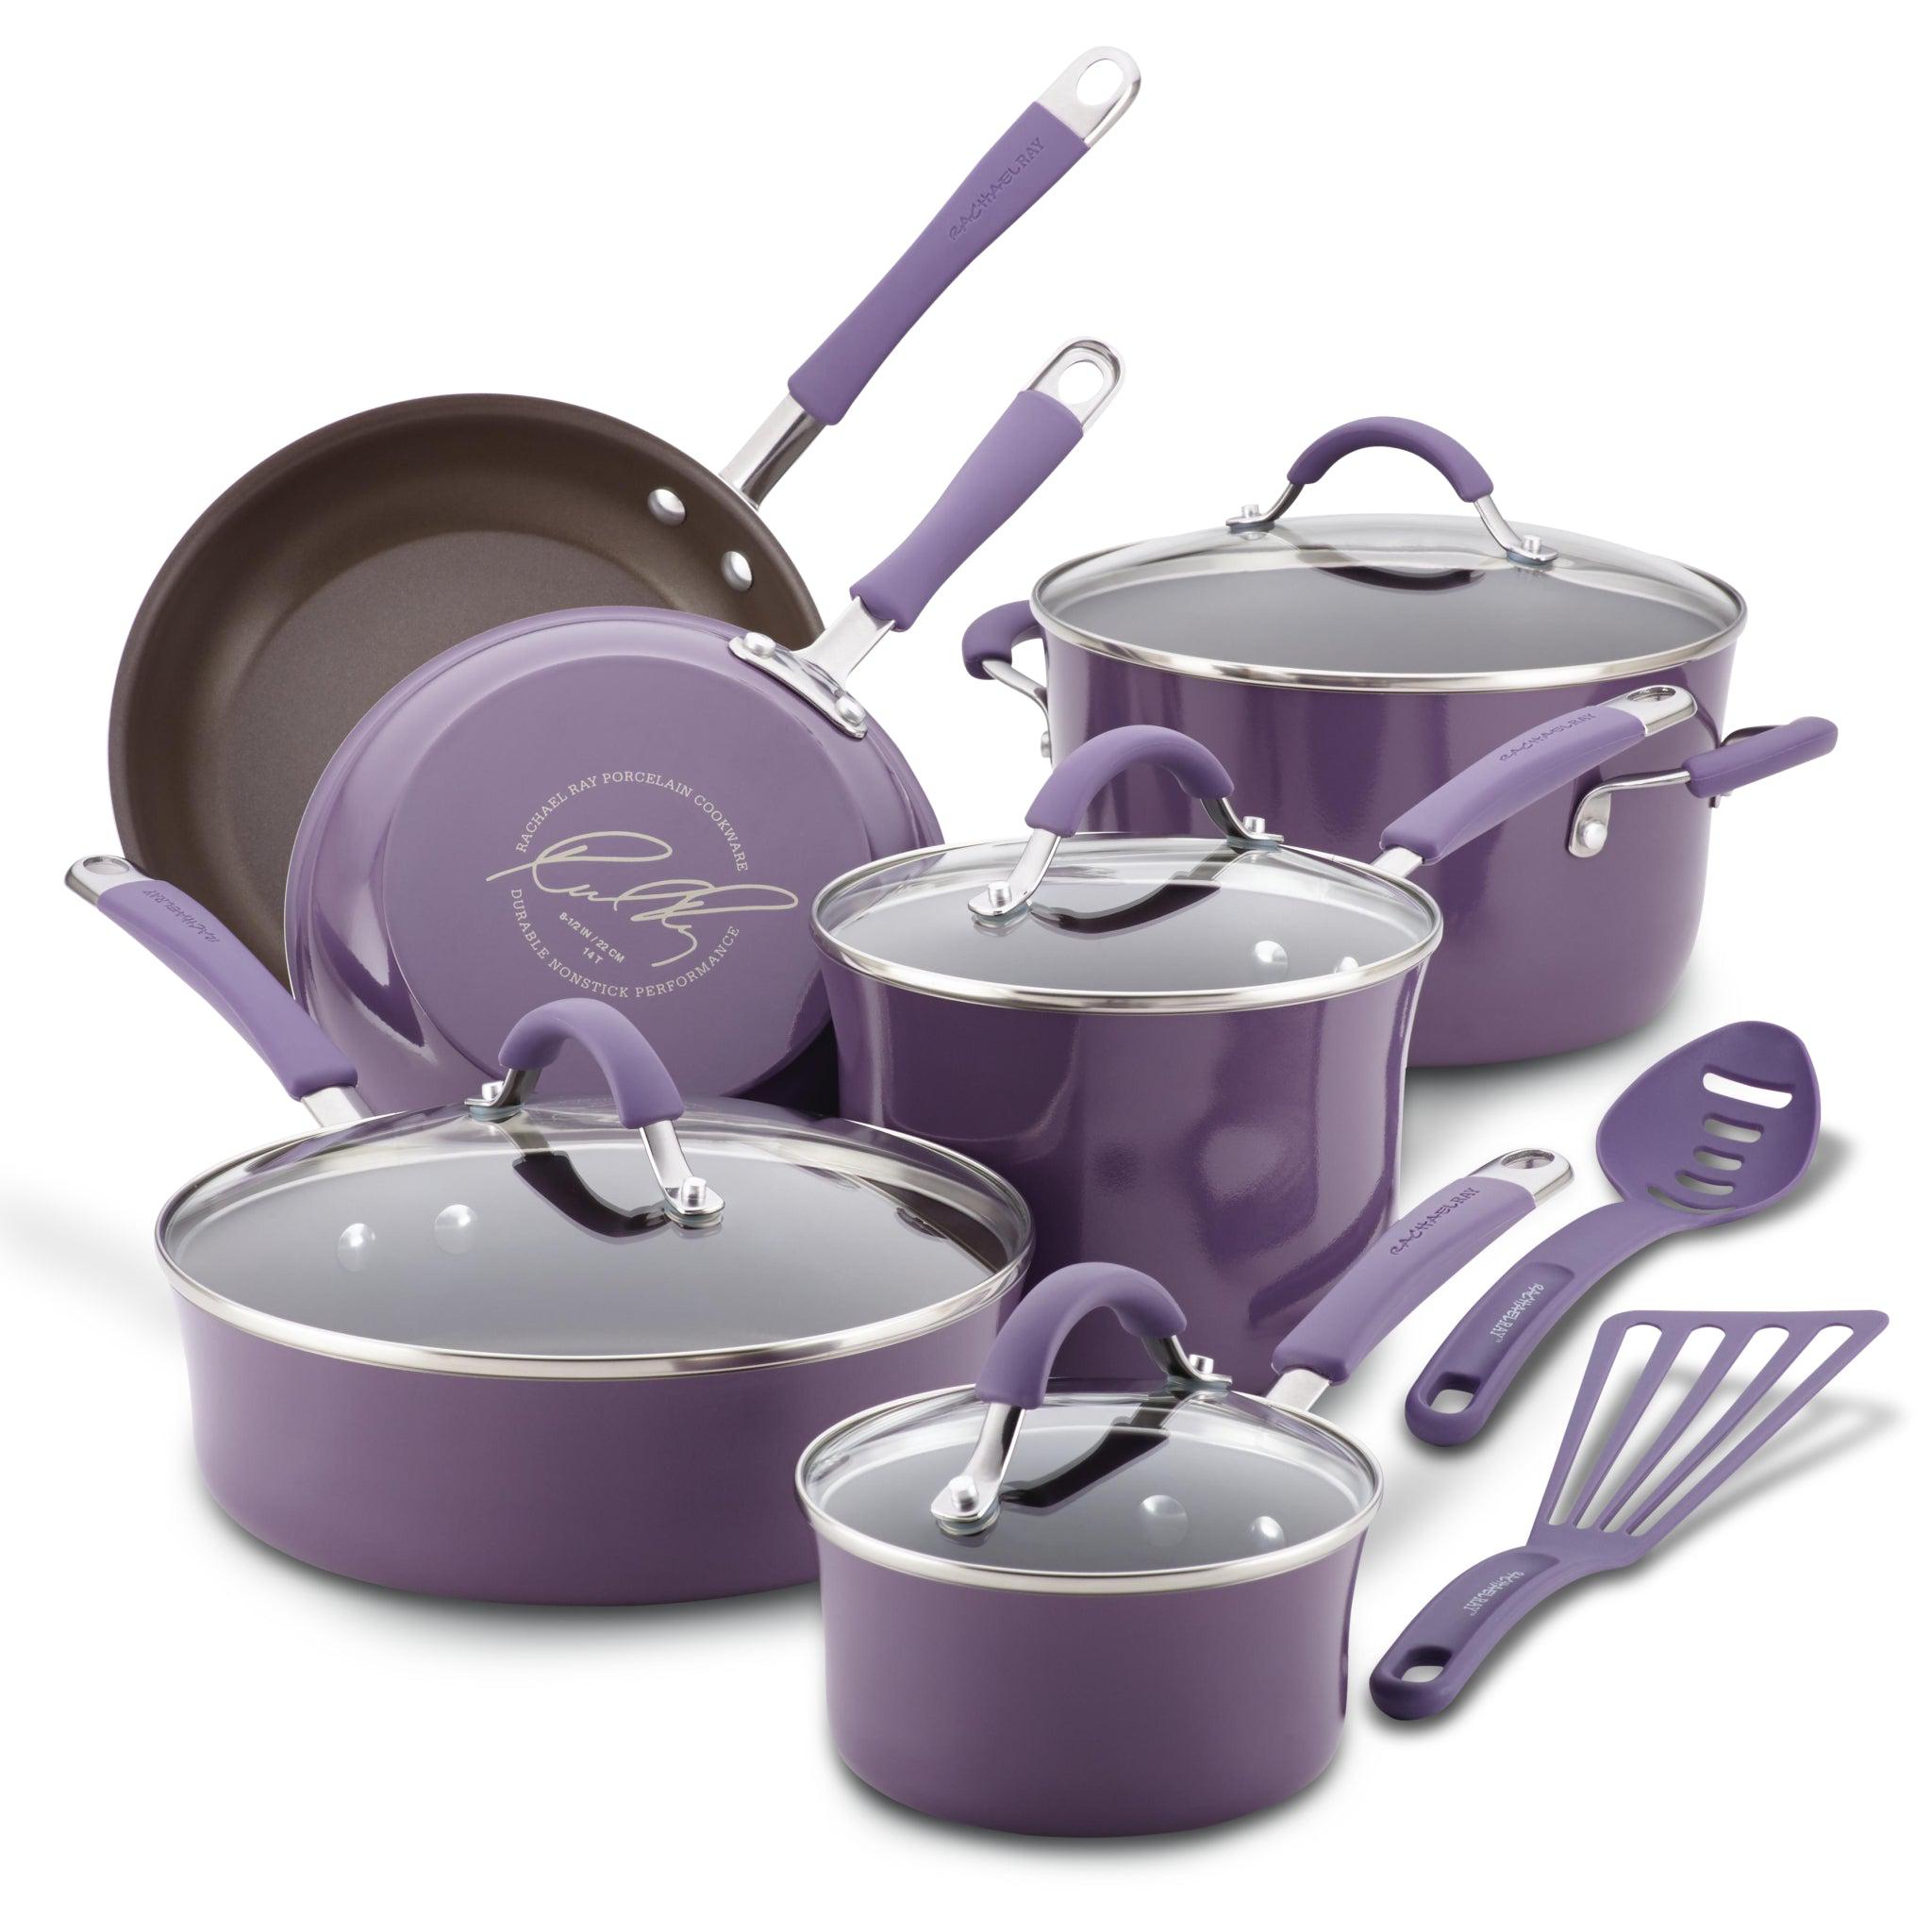  Rachael Ray Brights Nonstick Cookware Pots and Pans Set, 10  Piece, Marine Blue: Home & Kitchen